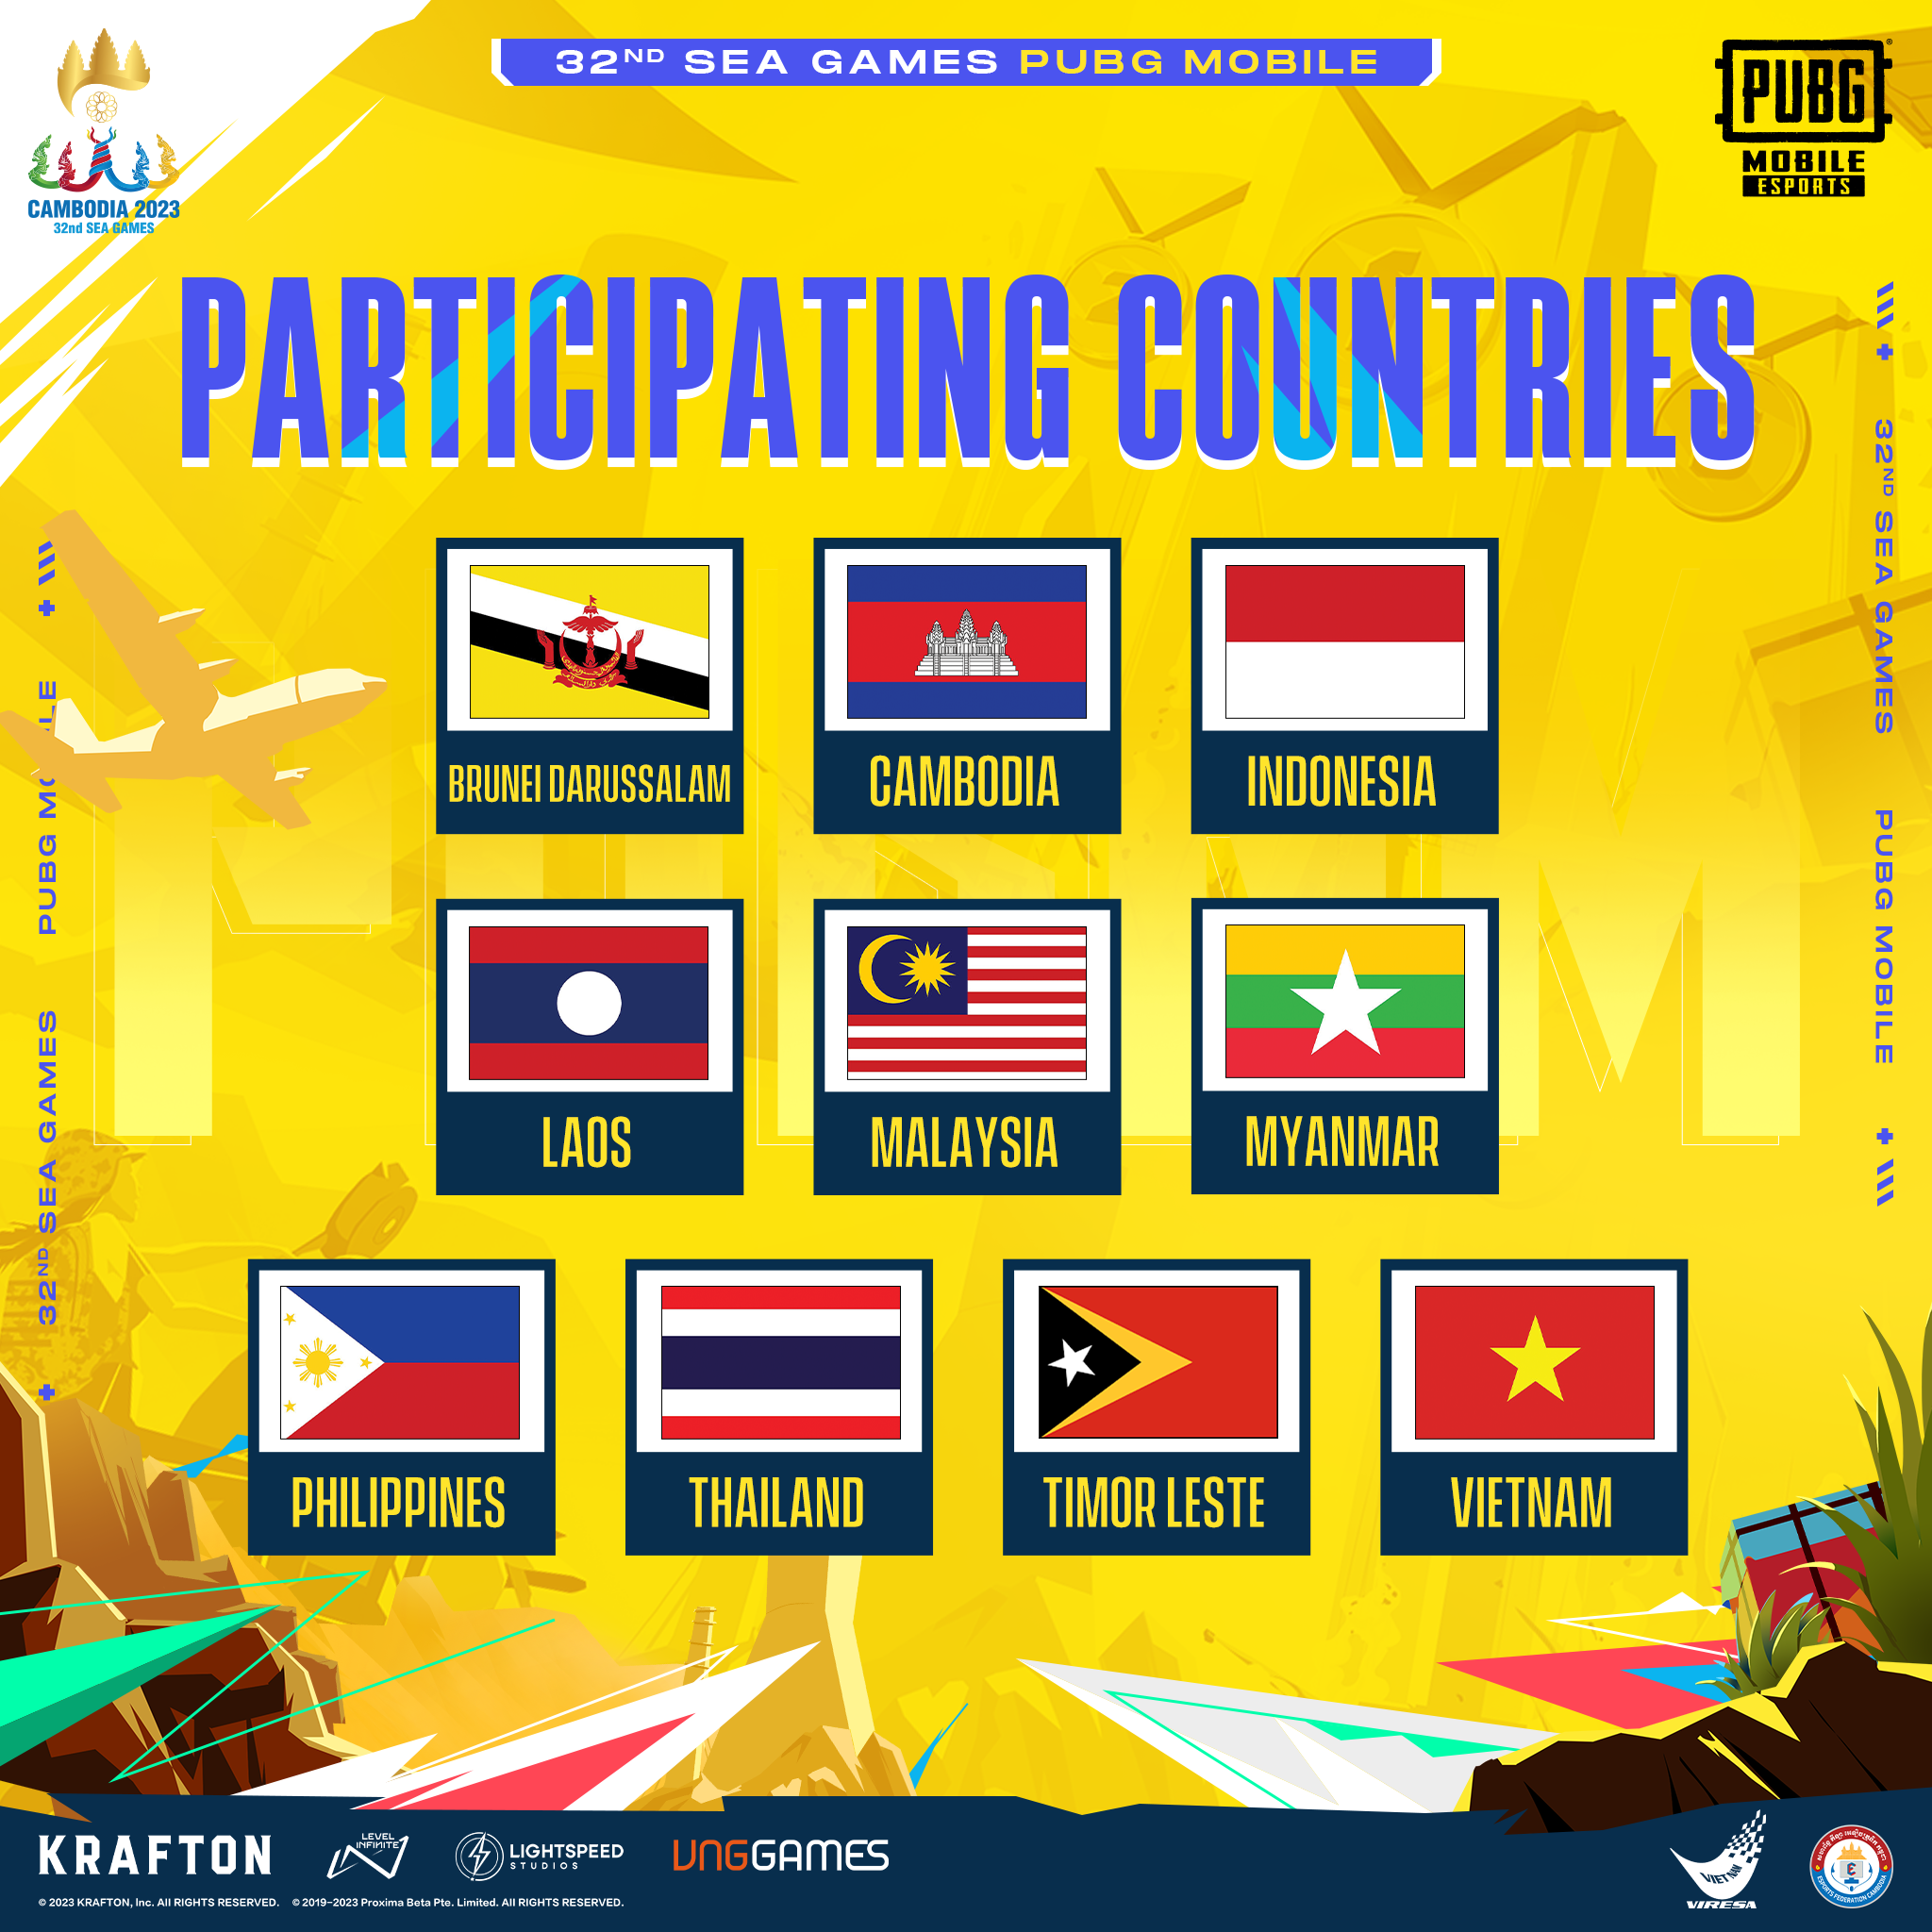 List of Participating Countries